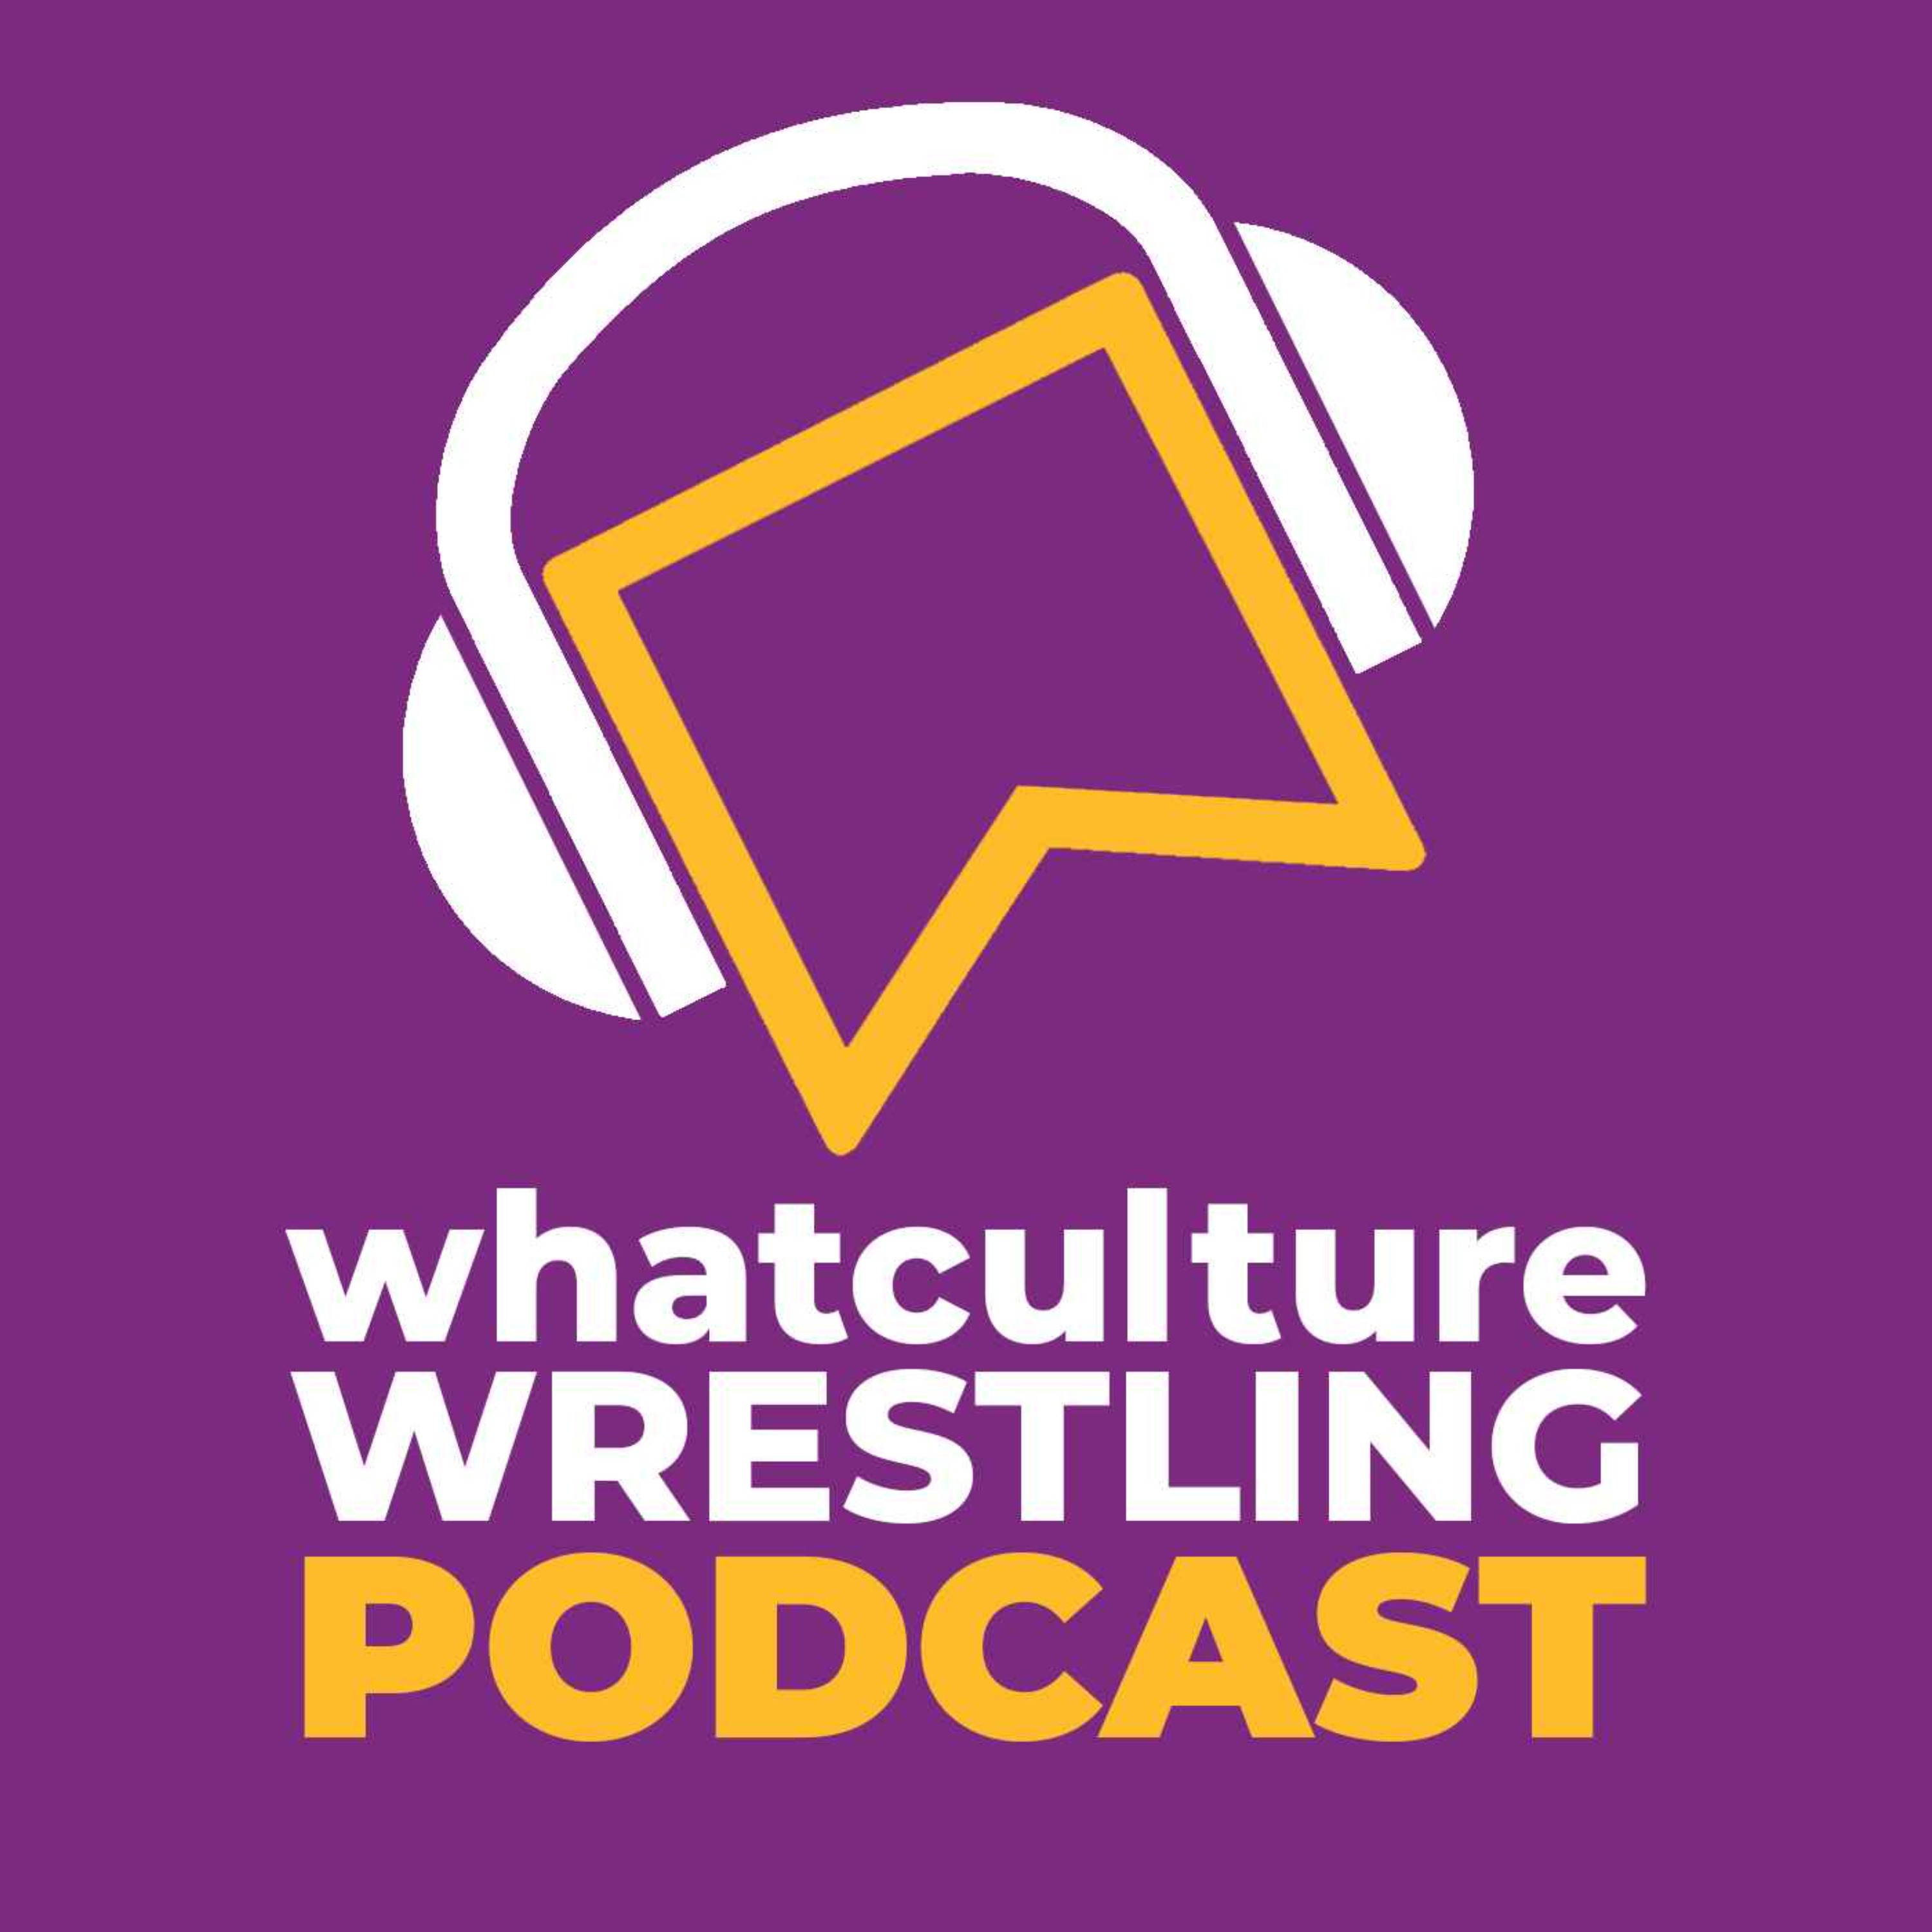 Talking Wrestling With WhatCulture Gaming's Josh Brown